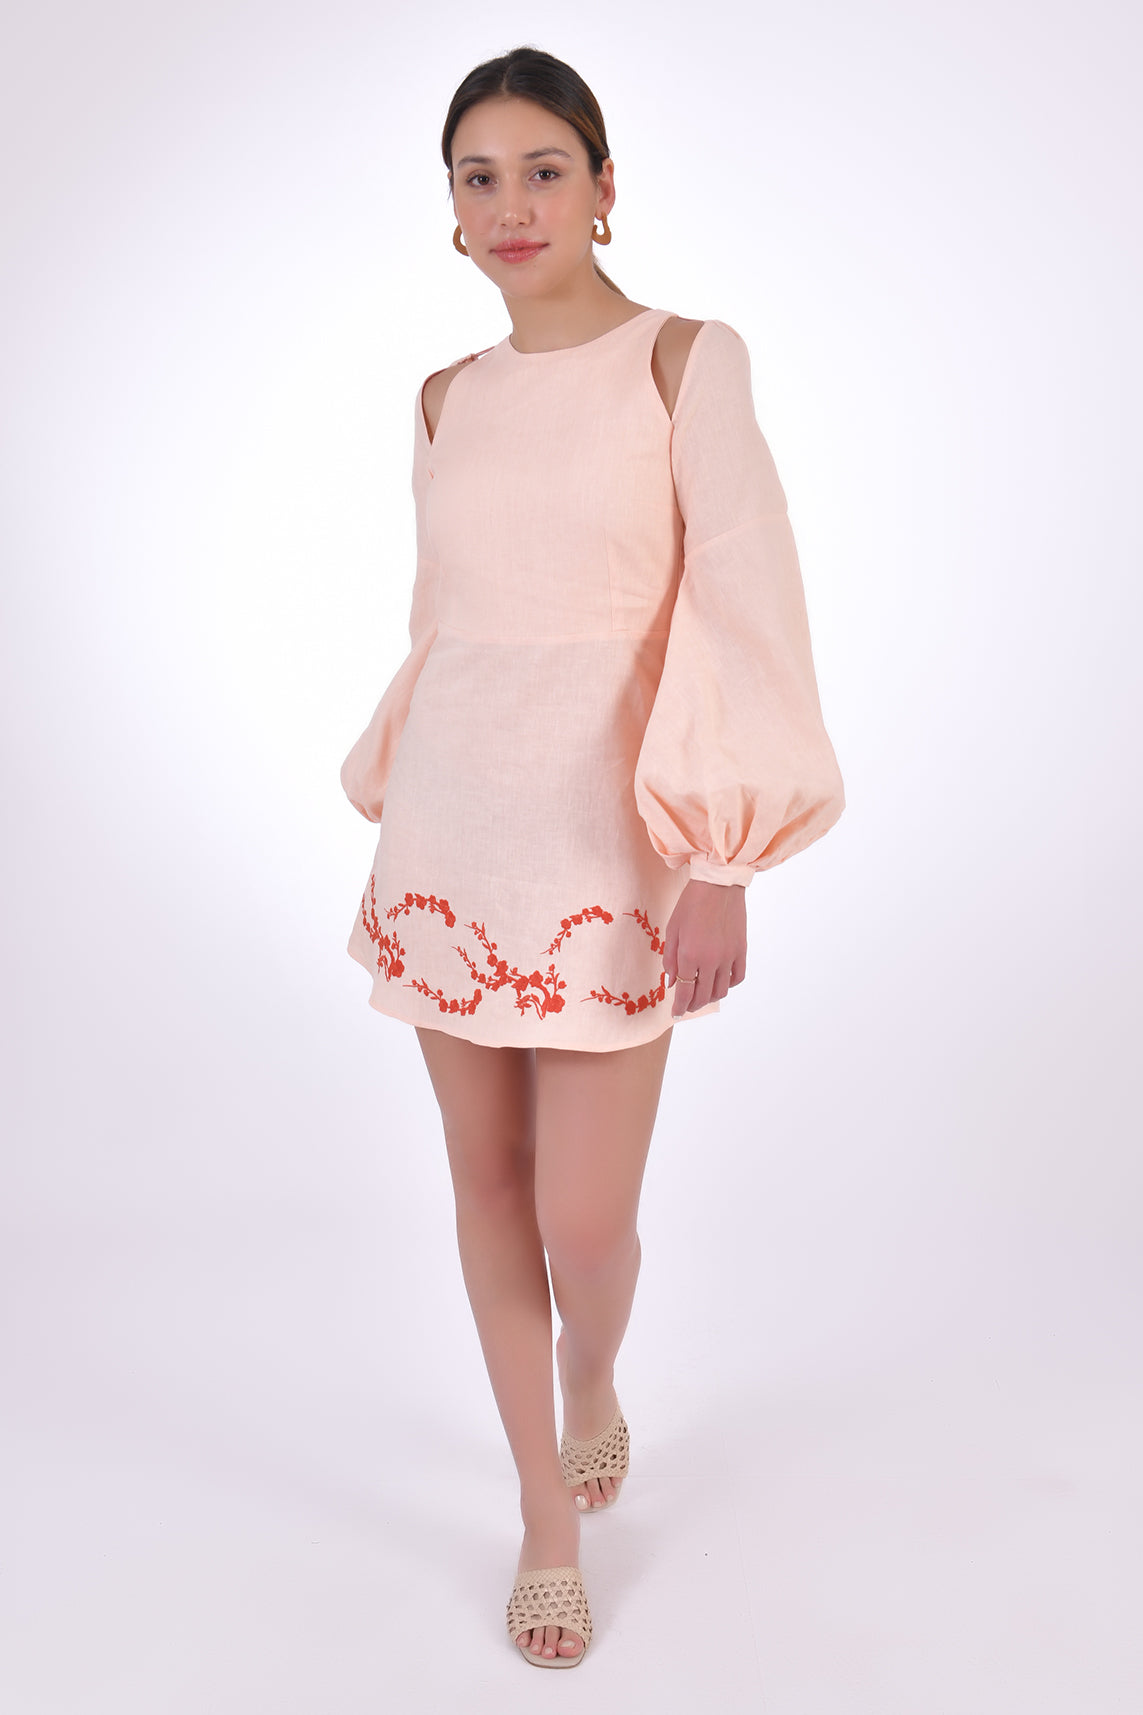 Fanm Mon Gizem Mini  Linen Dress, Made to Measure with puff sleeve and  featuring embroidery detail. Walking View. 